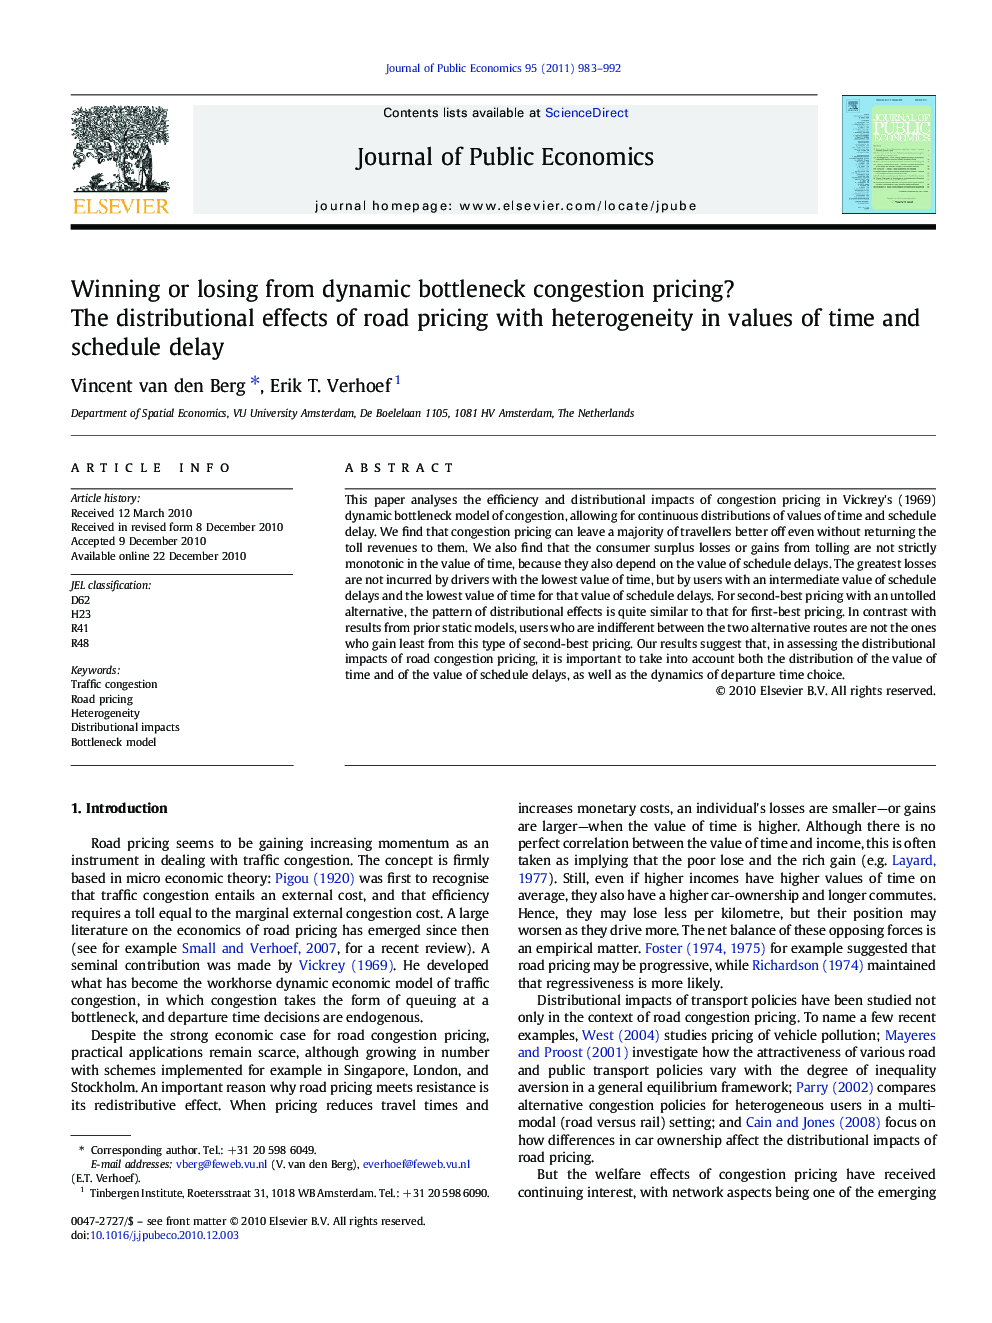 Winning or losing from dynamic bottleneck congestion pricing?: The distributional effects of road pricing with heterogeneity in values of time and schedule delay